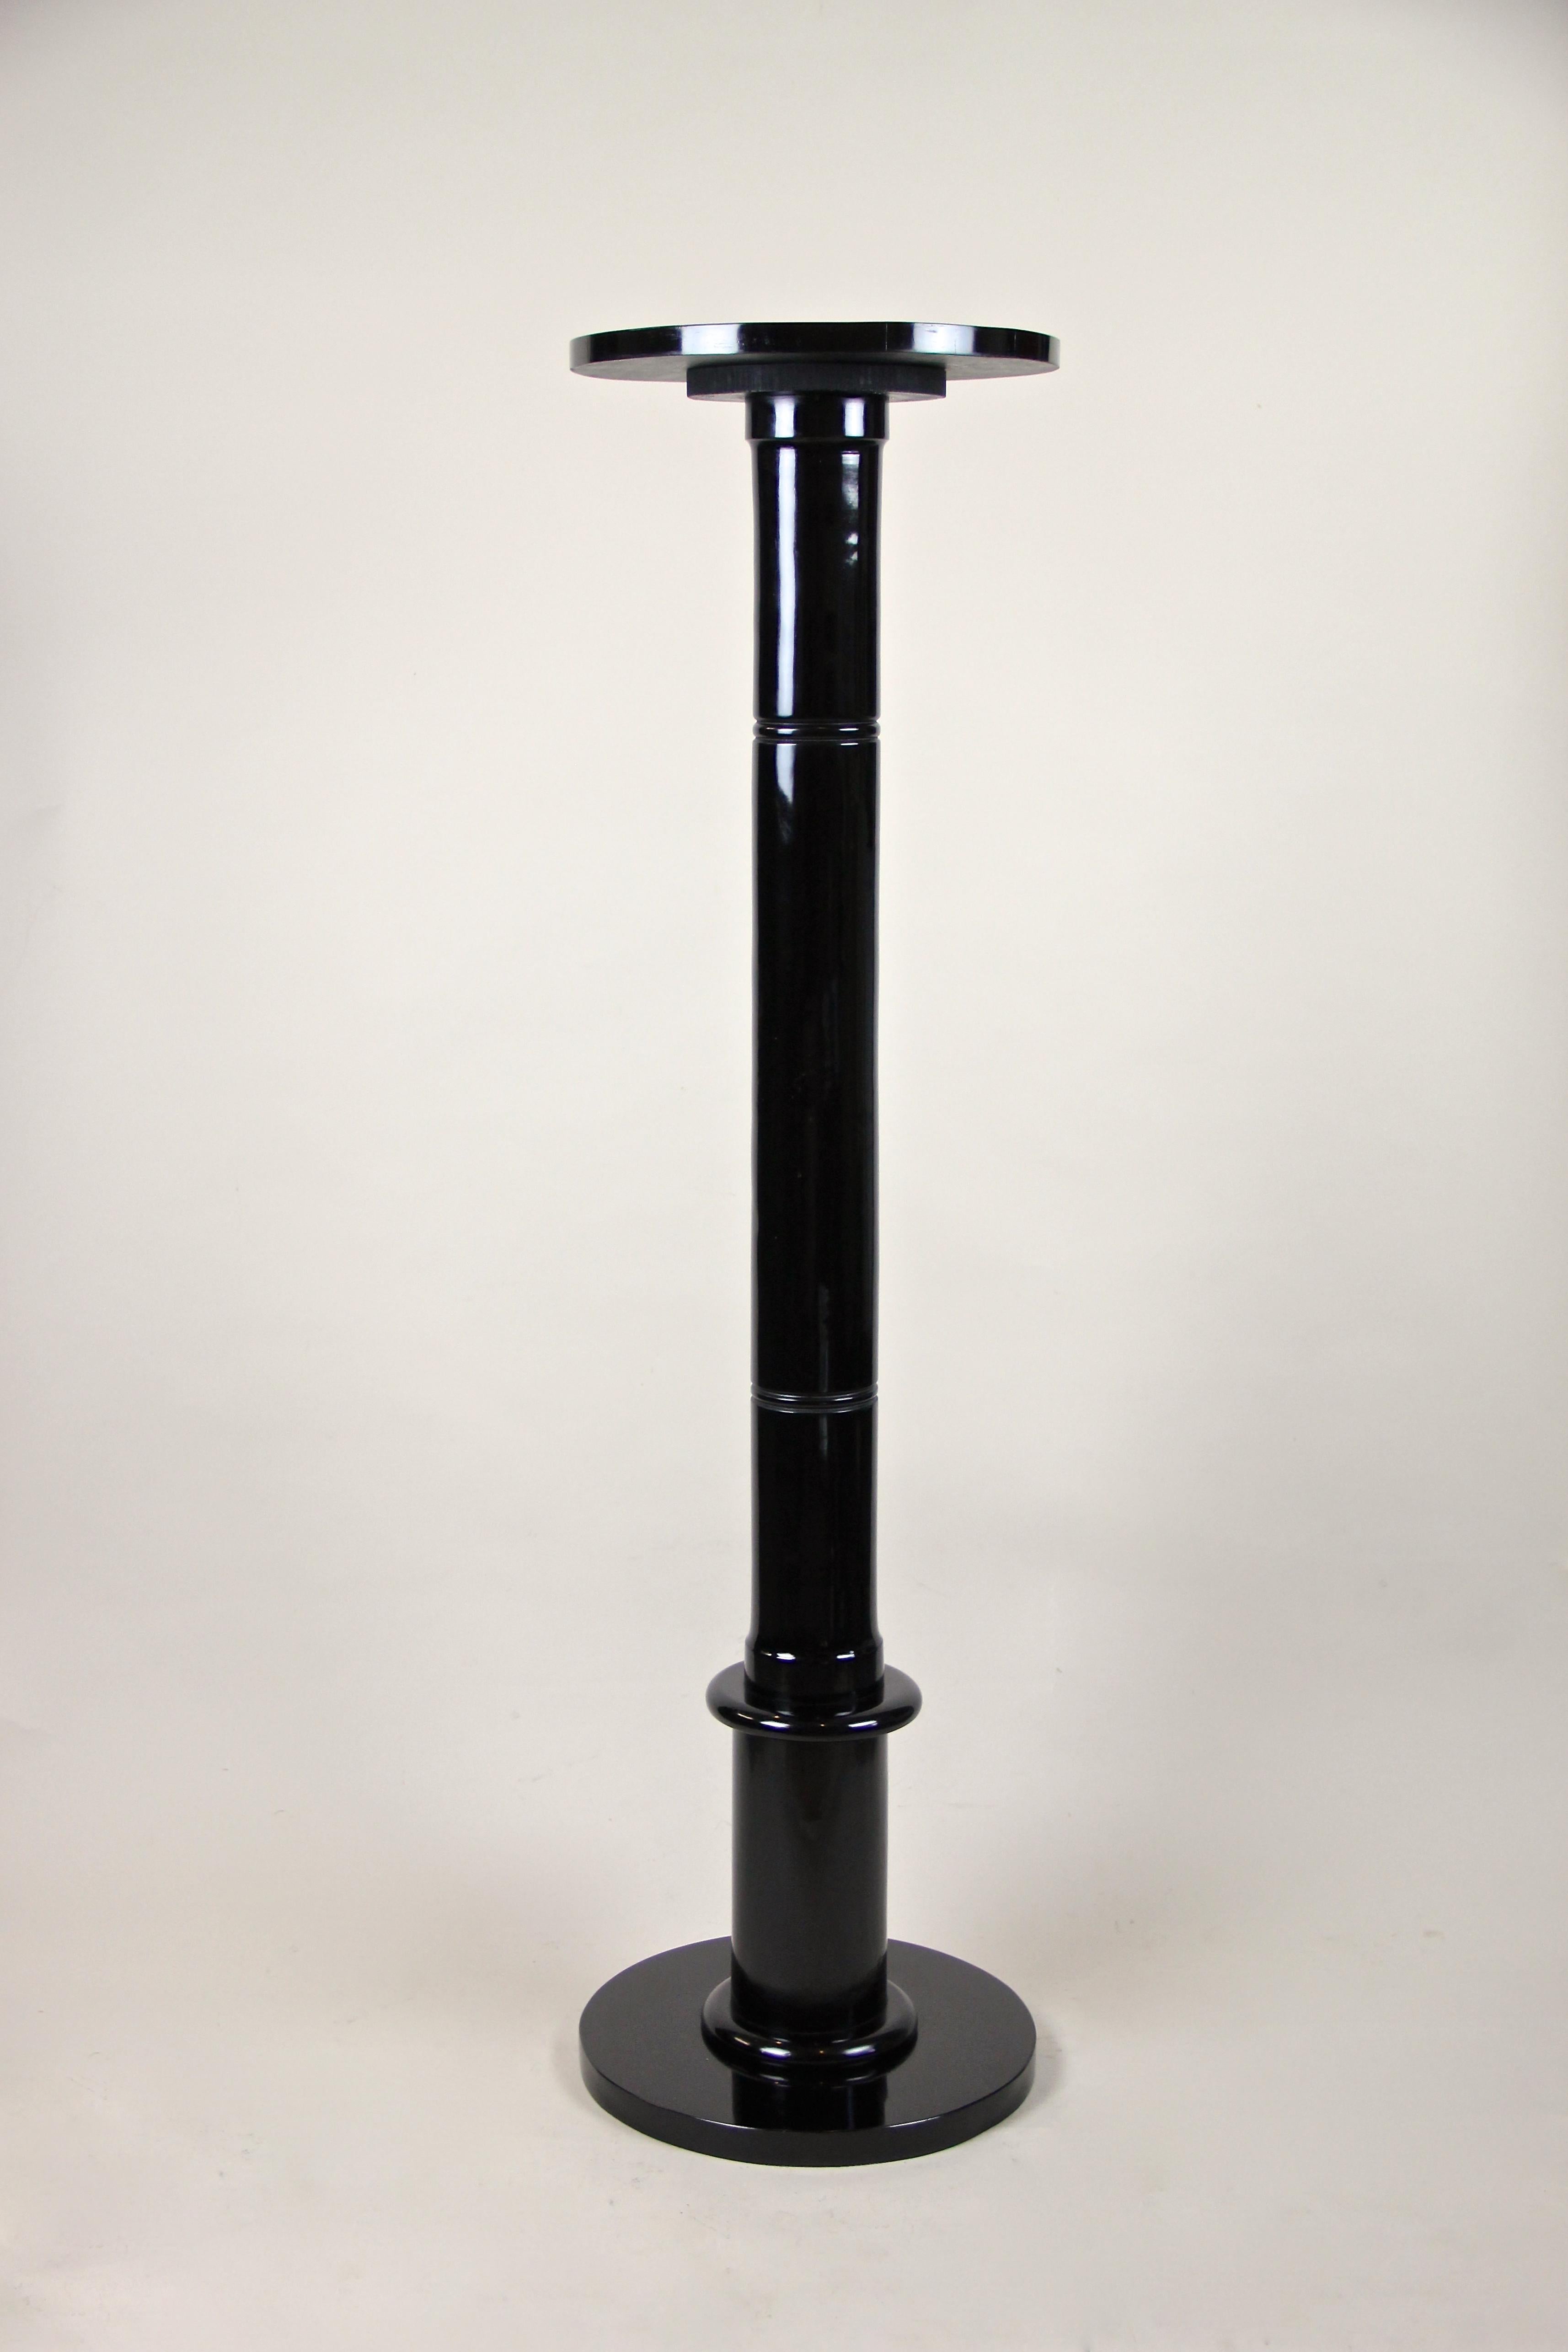 Astonishing ebonized Art Nouveau column pedestal from Austria, circa 1900. Hand carved out of solid beech wood, this impressive pedestal shows a fantastic ebonized, black shellac polished surface. Standing solid on a simple but beautiful shaped